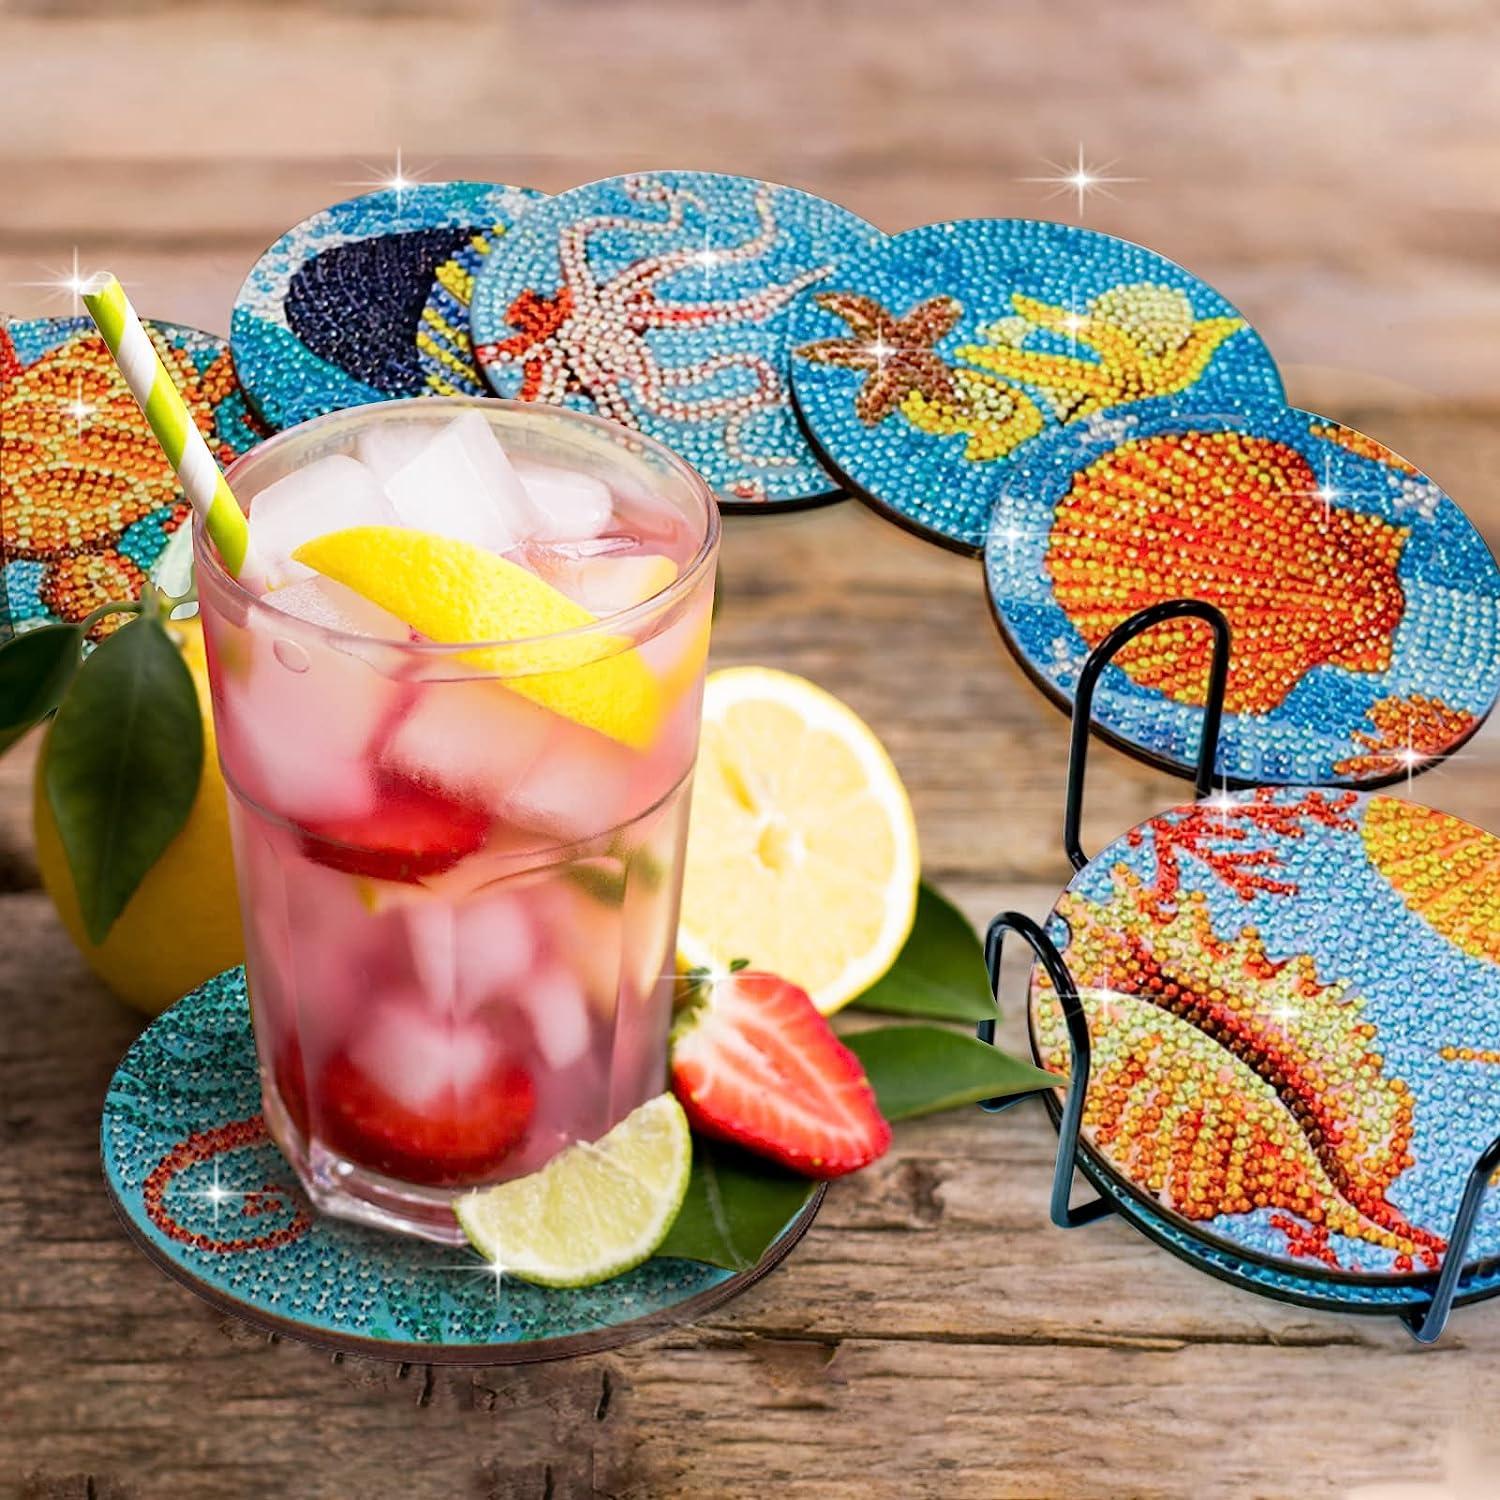 Ocean Style Diamond Painting Coasters - DIY Kit with Holder and Accessories